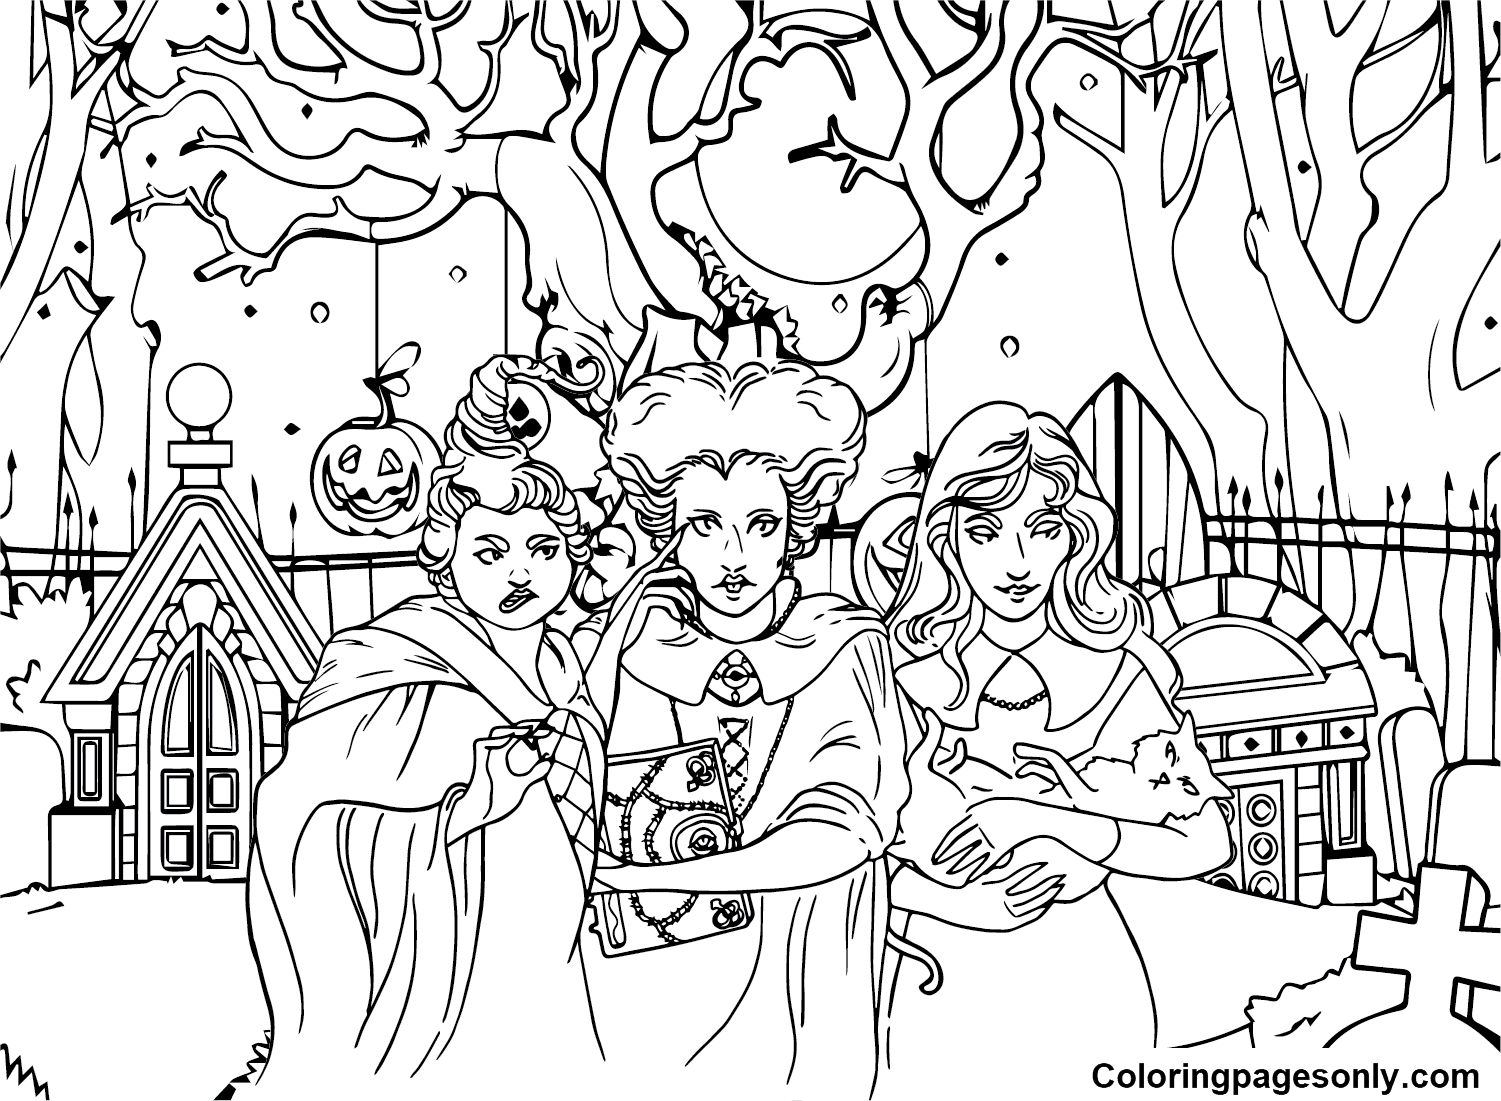 Free Hocus Pocus Images Coloring Pages